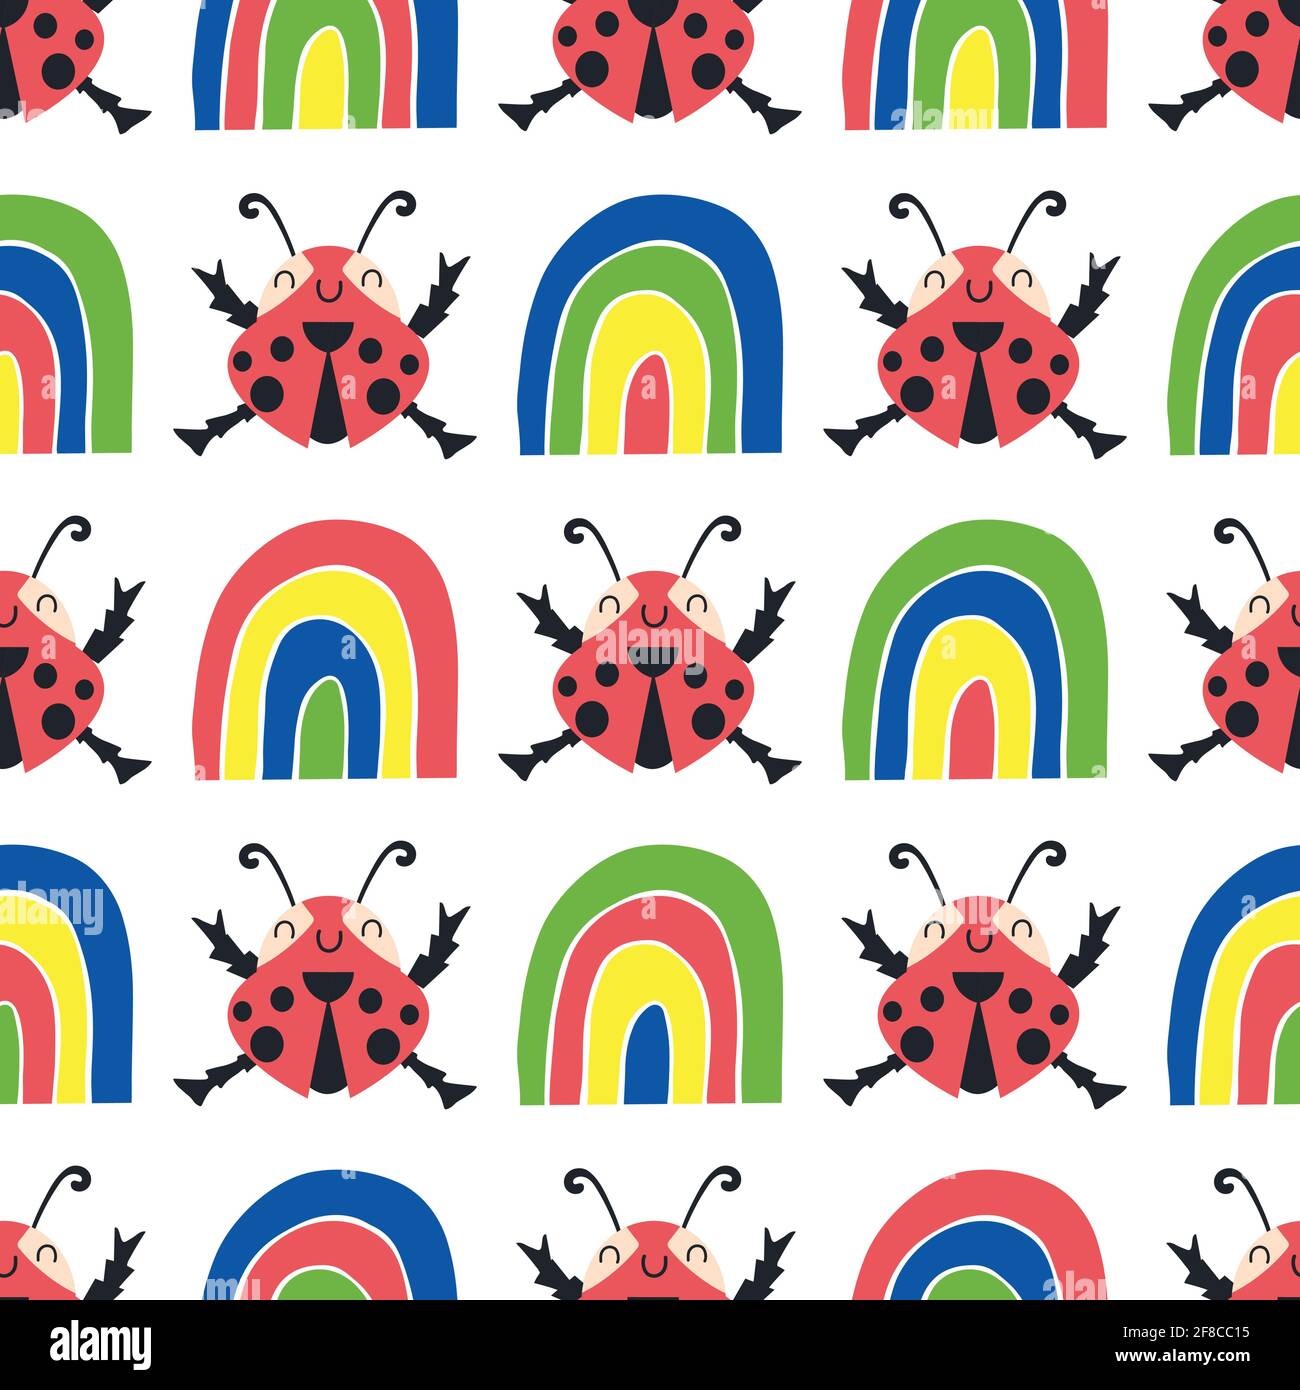 Cute ladybirds and rainbows seamless vector pattern background. Happy dancing ladybugs in childlike drawing style. Geometric design in primary colors Stock Vector